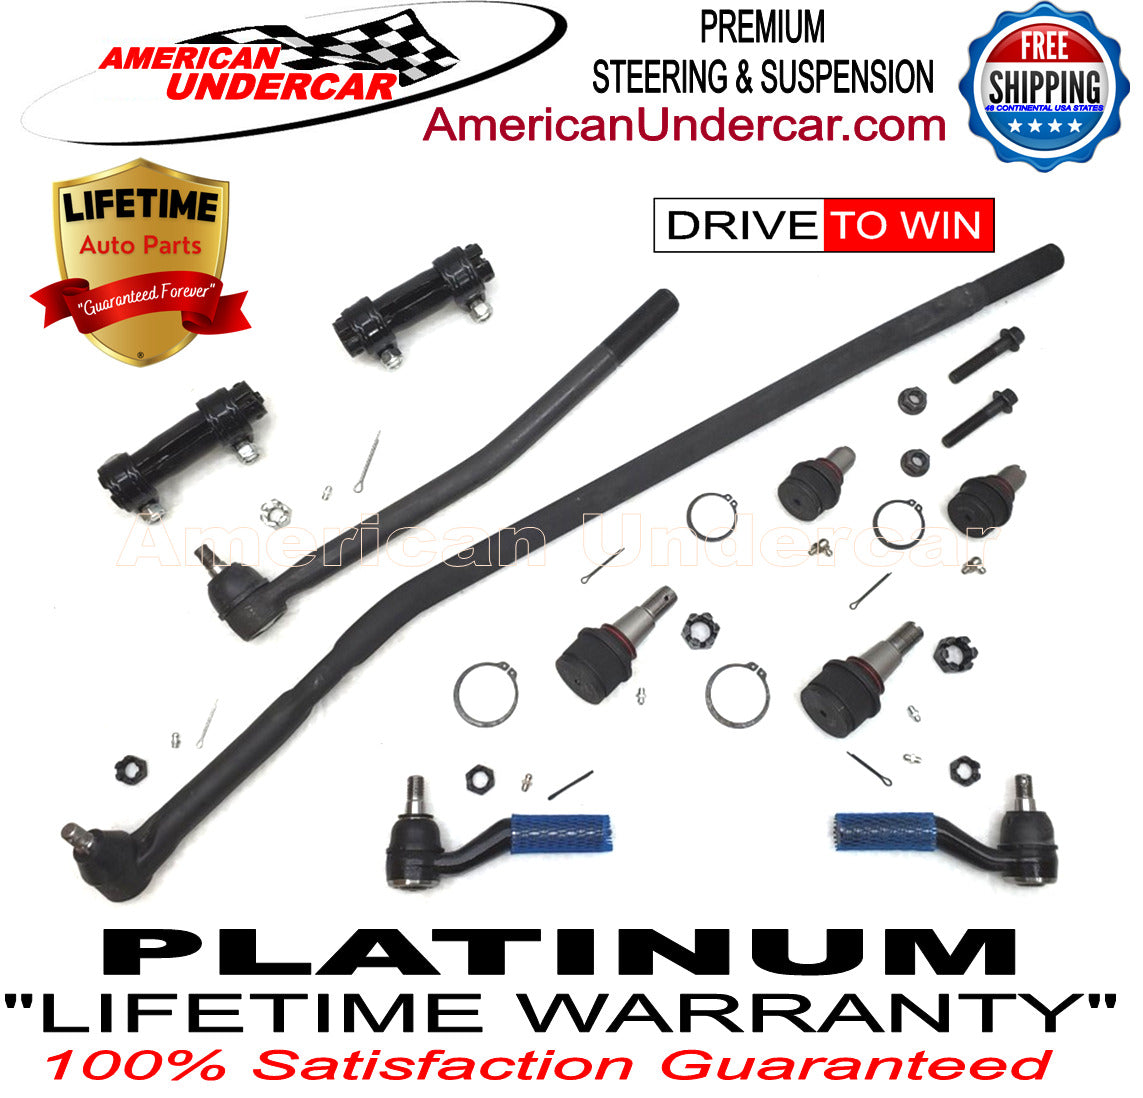 Lifetime Ball Joints Drag Link Tie Rod Sleeve Steering Kit for 2007-2014 Ford E150 2WD